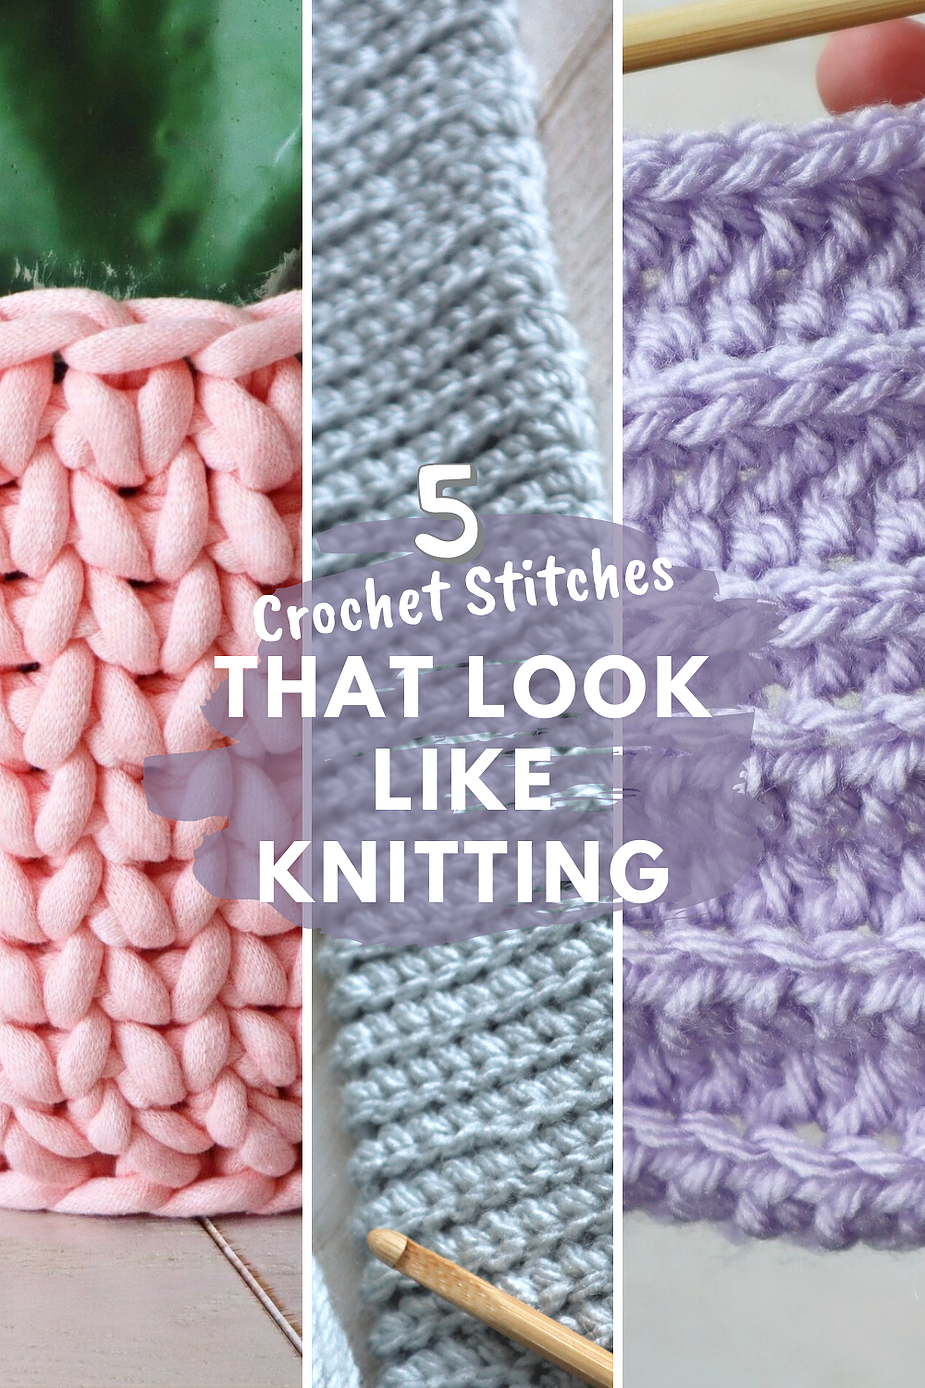 5 Crochet Stitches That Look Like Knitting! – The Snugglery